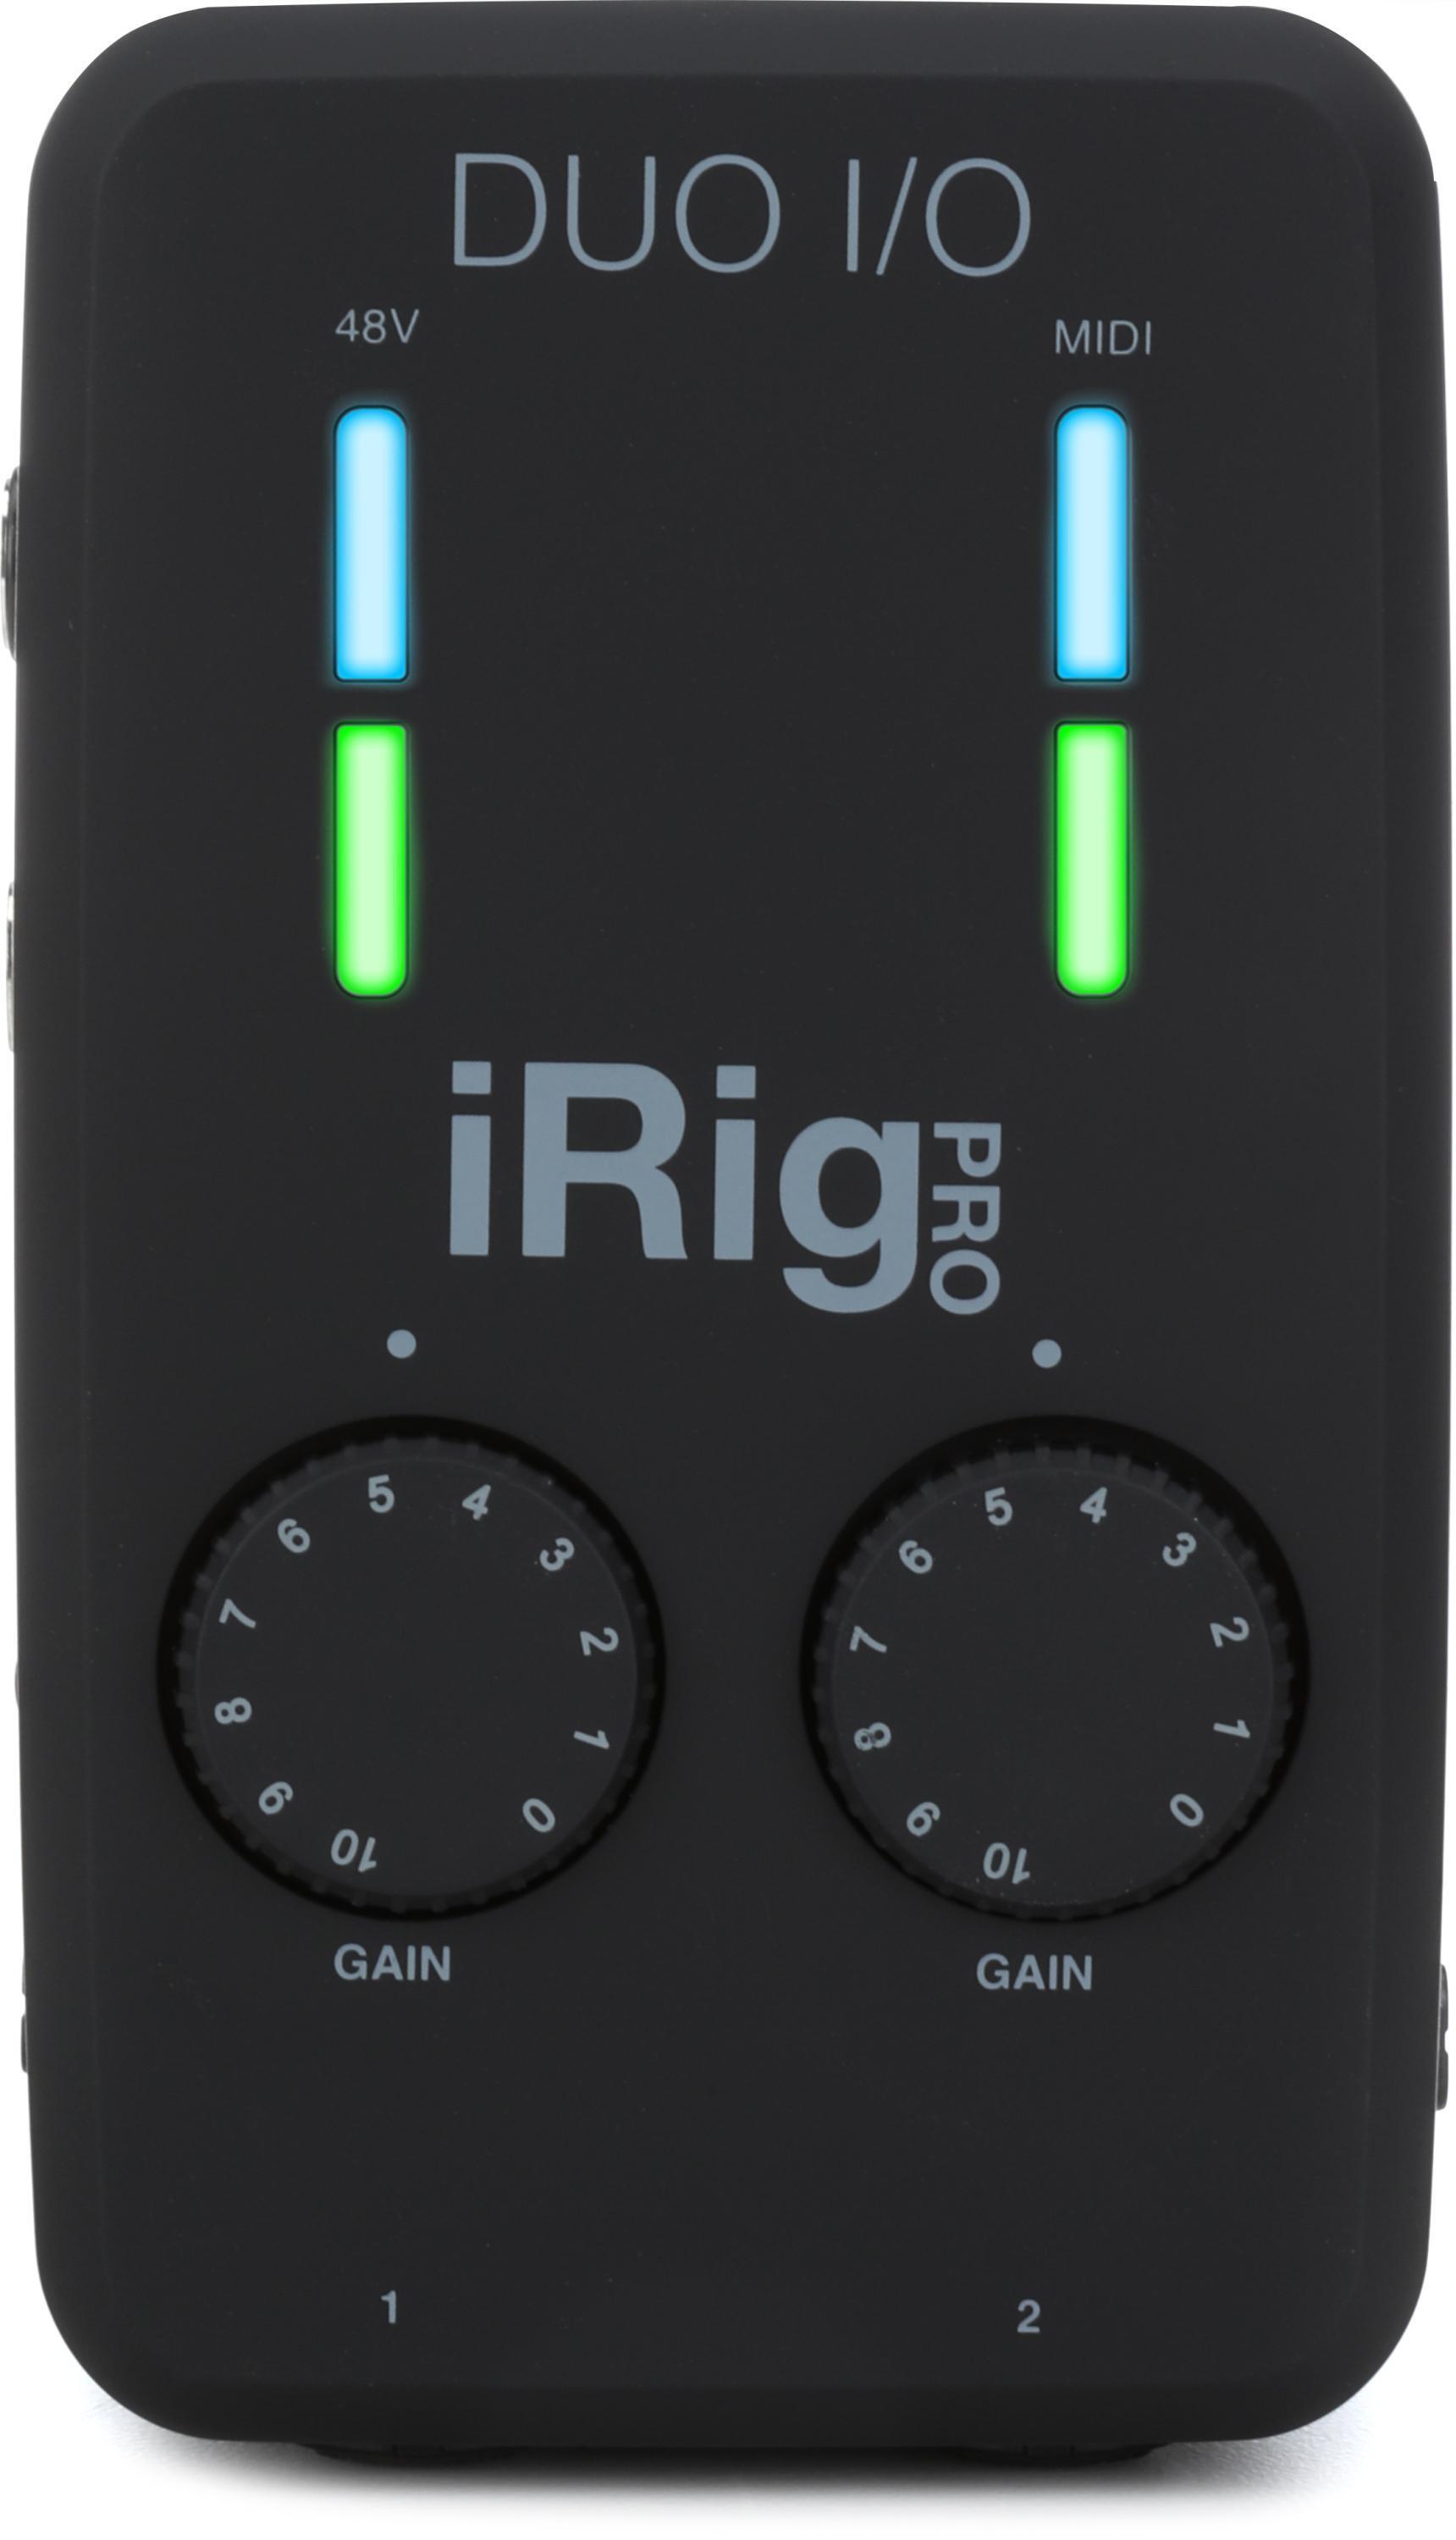 IK Multimedia iRig Pro Duo I/O 2-channel Audio/MIDI Interface for iOS,  Android, and Mac/PC